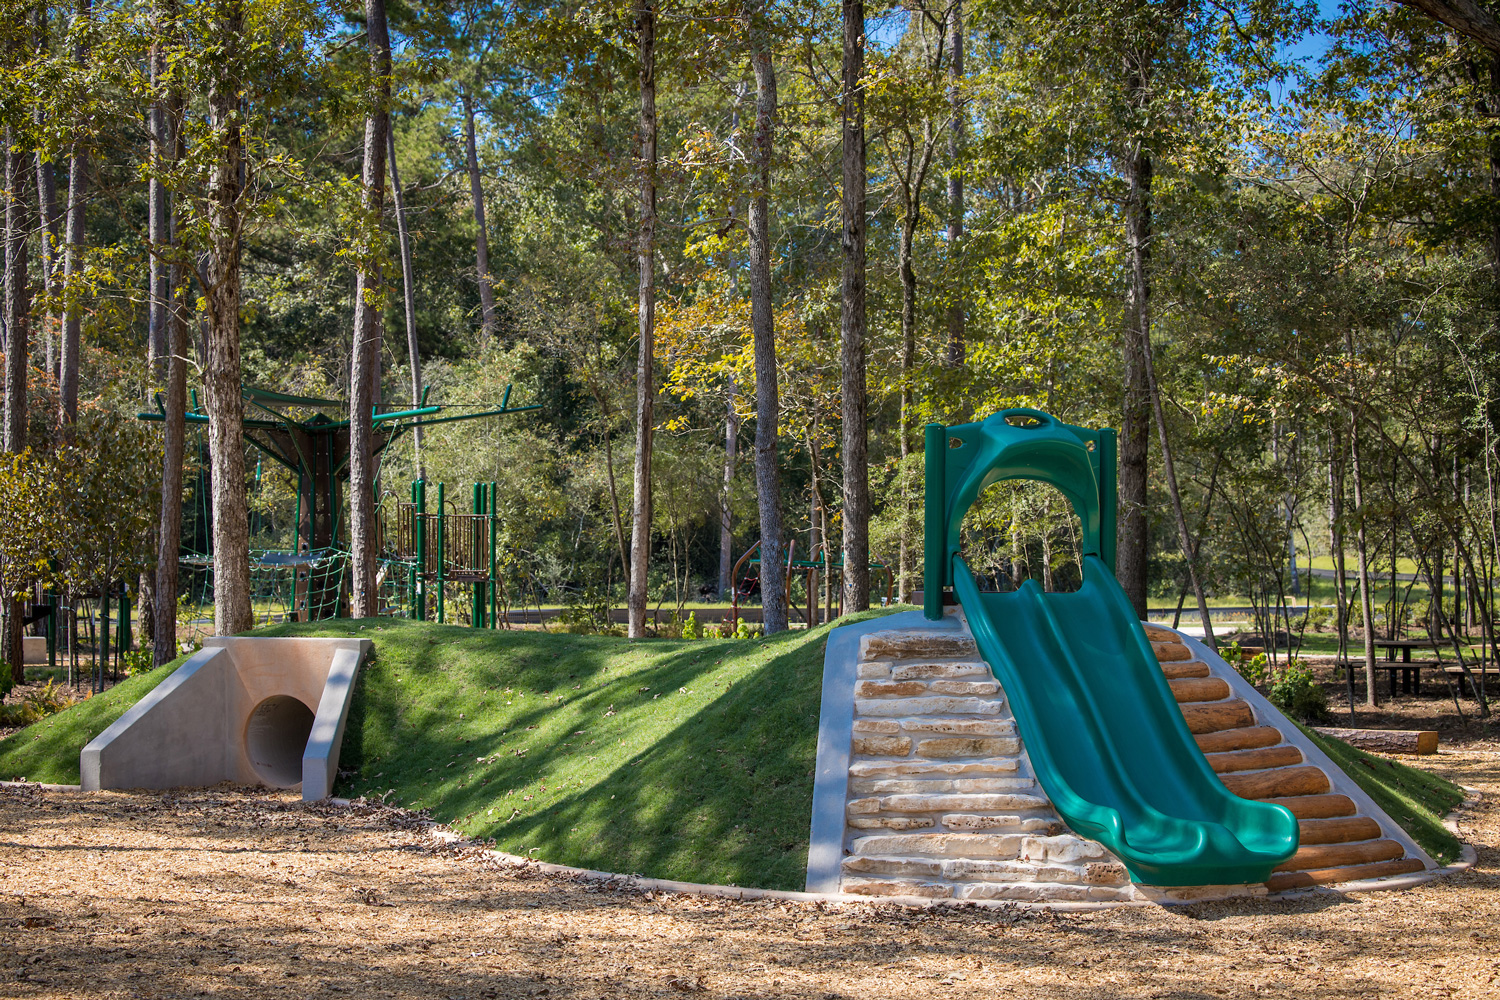 Sue Luce’s Daisy Park – A Shining Gem Within The Woodlands Hills